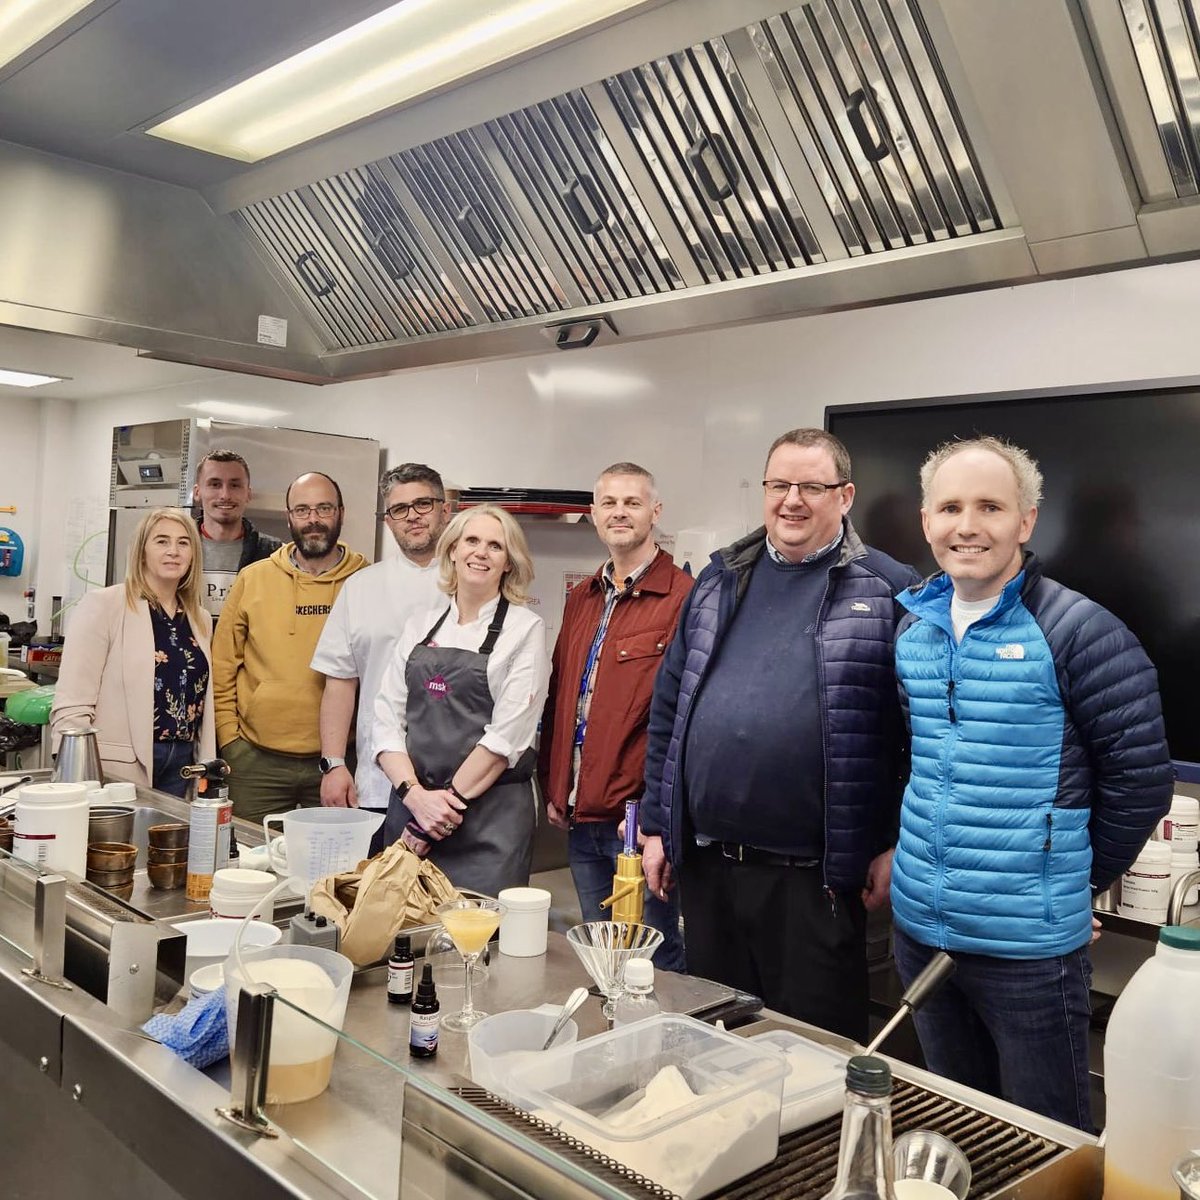 What an inspiring week we’ve had at @bfastmet. Our chefs have worked with lecturers from six different colleges from Northern Ireland over two days showcasing many different techniques. It was so good to connect with some new faces.